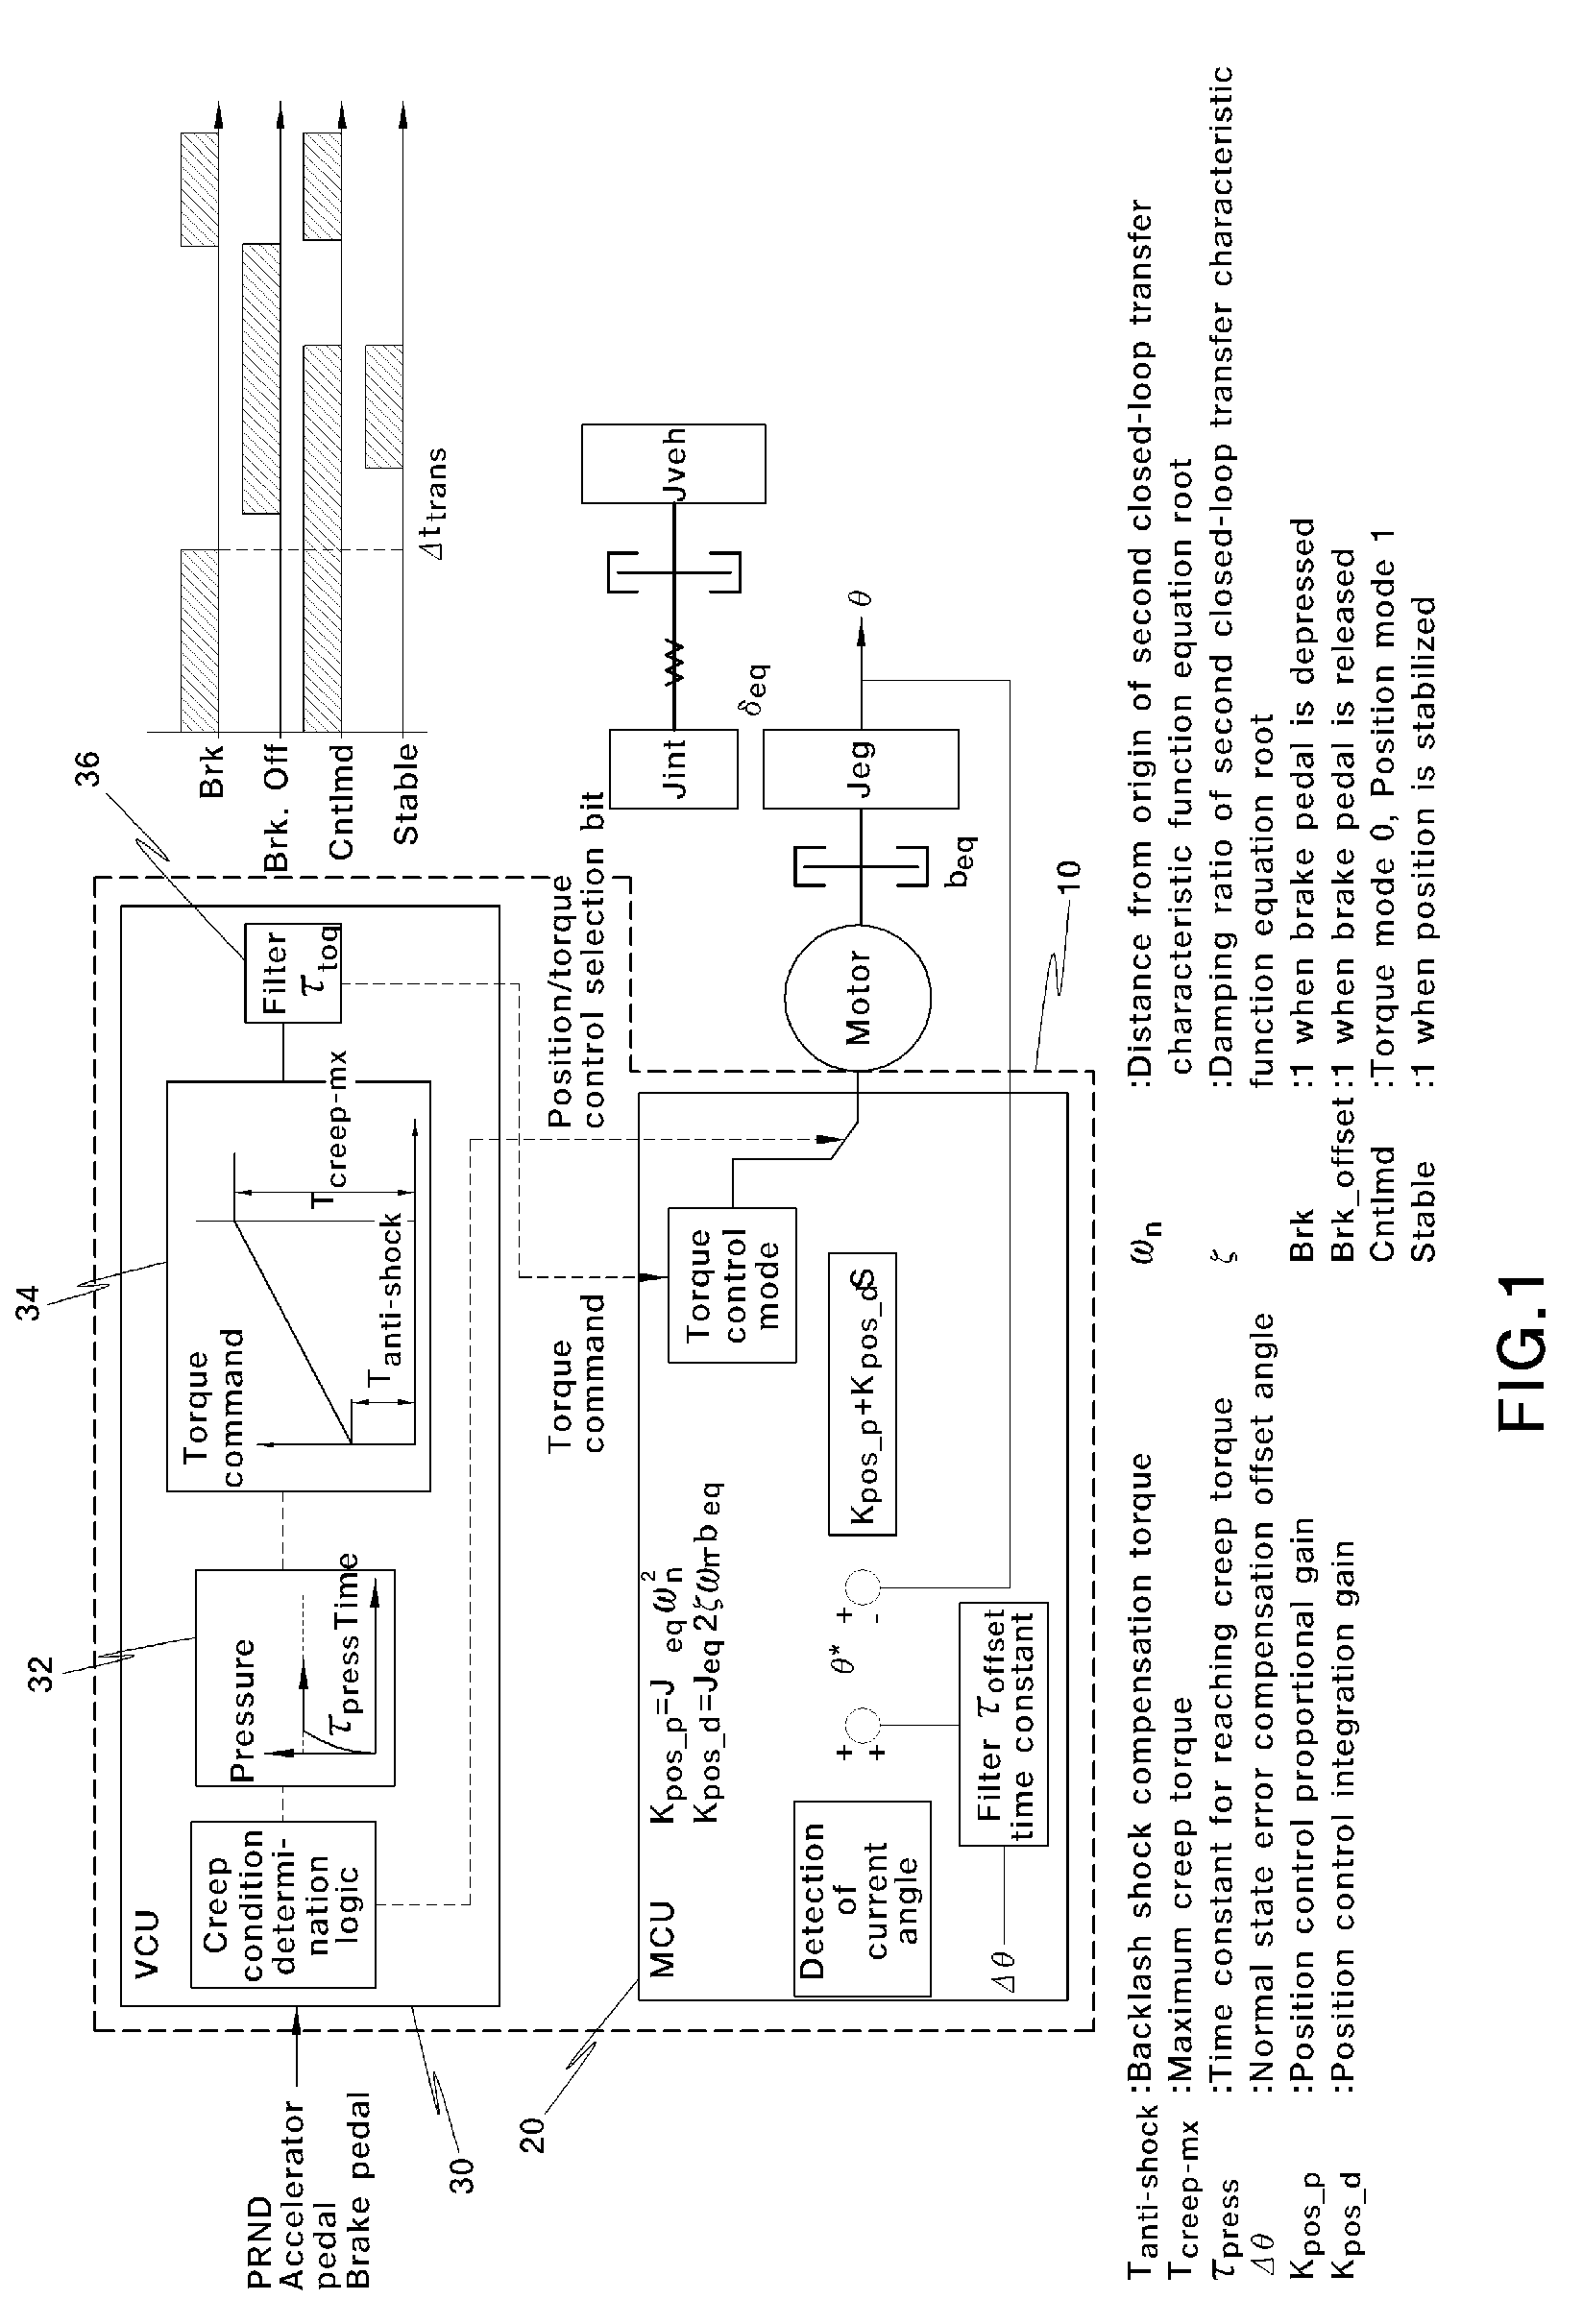 Apparatus and method for controlling motor position and creep of electric vehicle